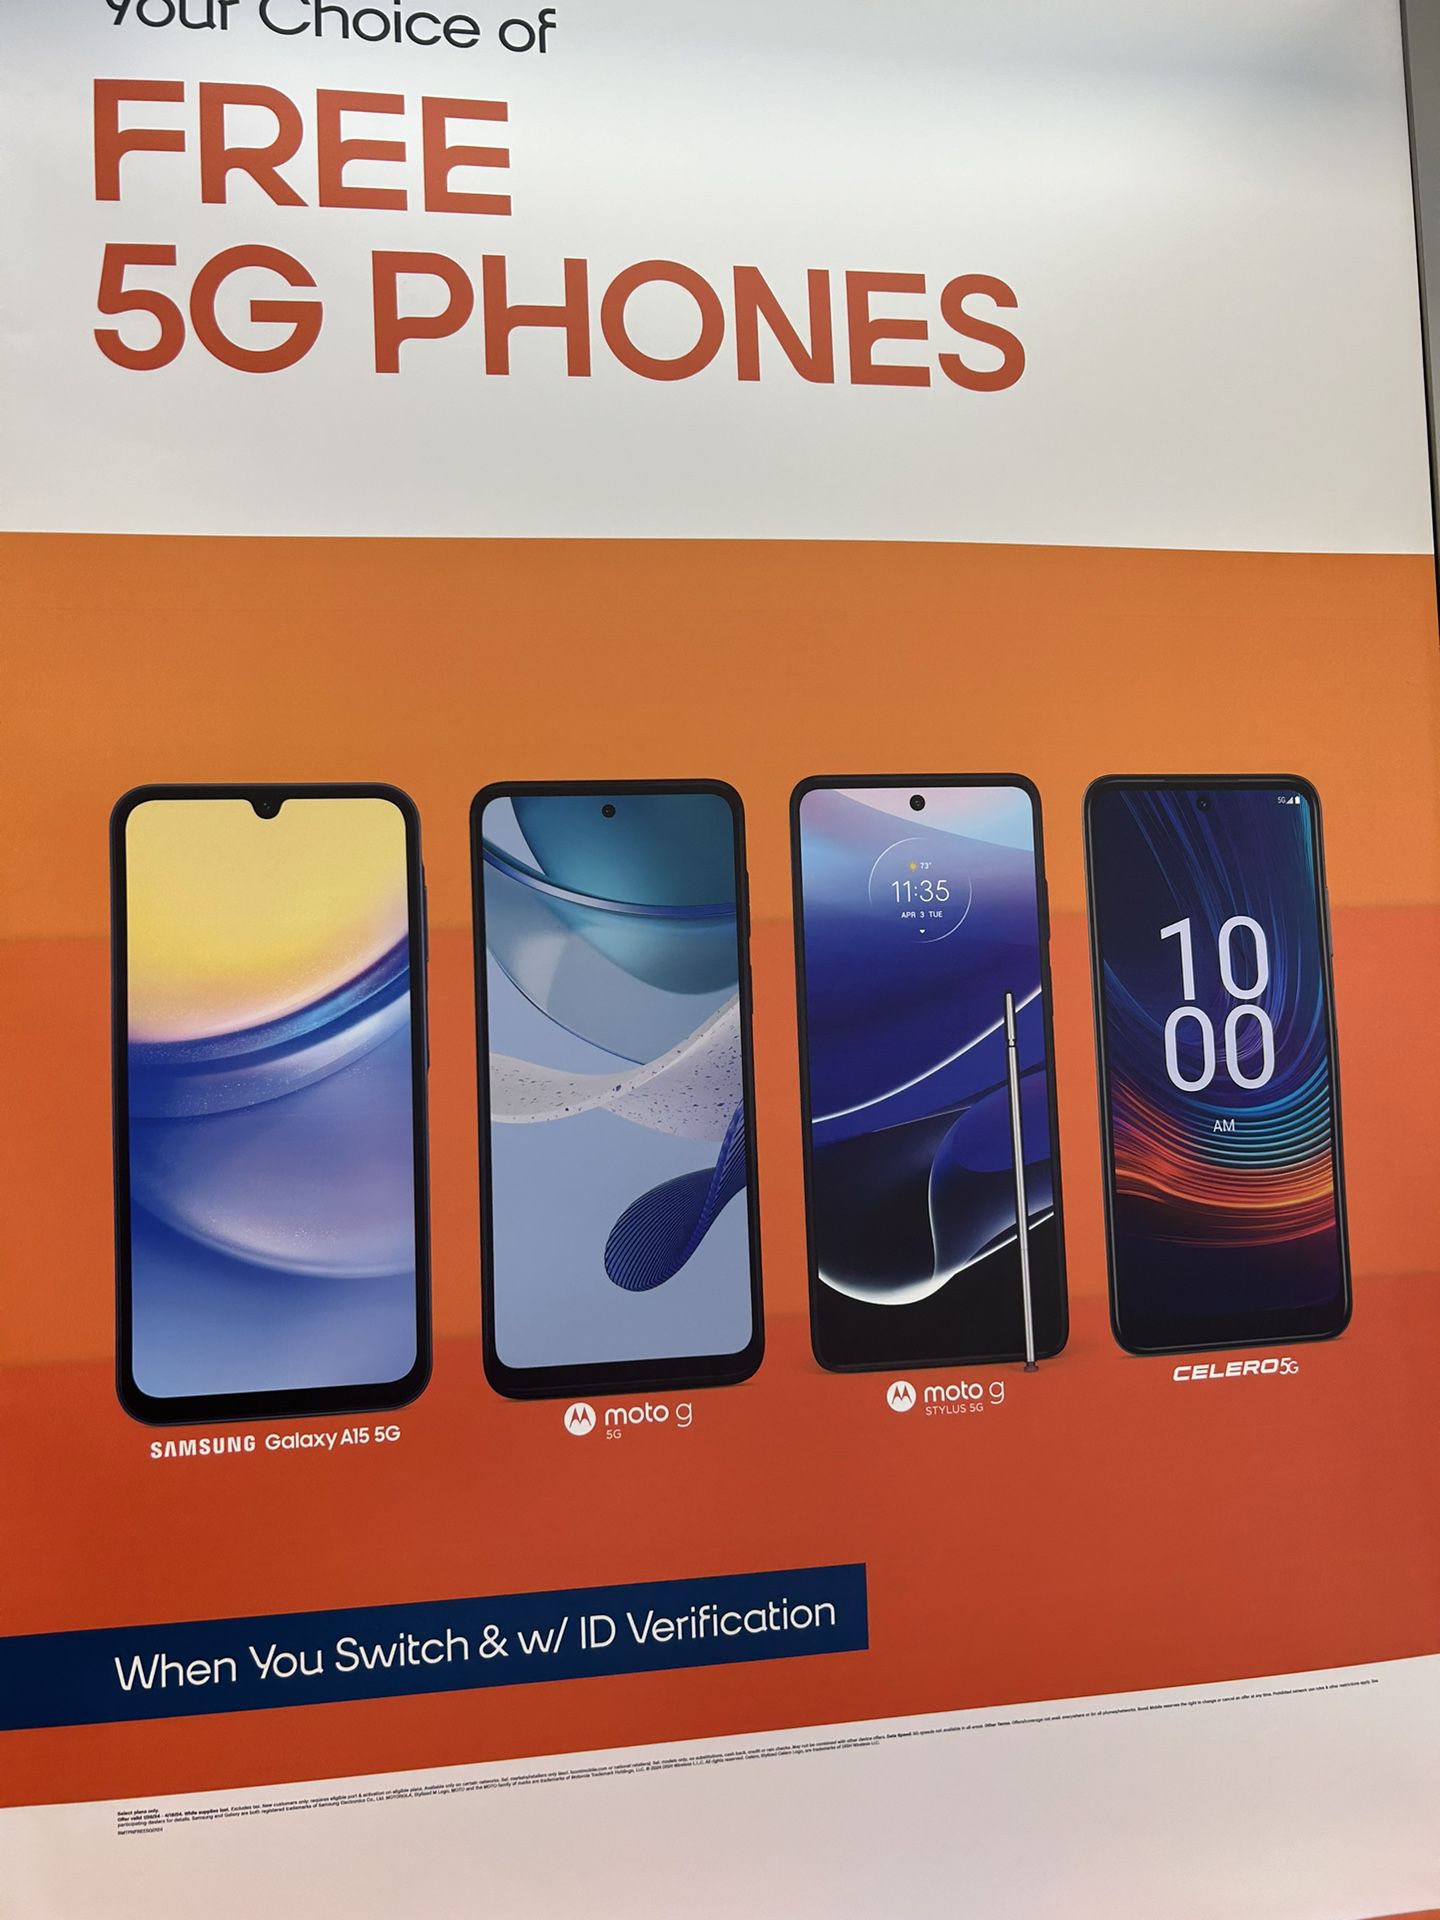 Get Free Phones When You Switch!